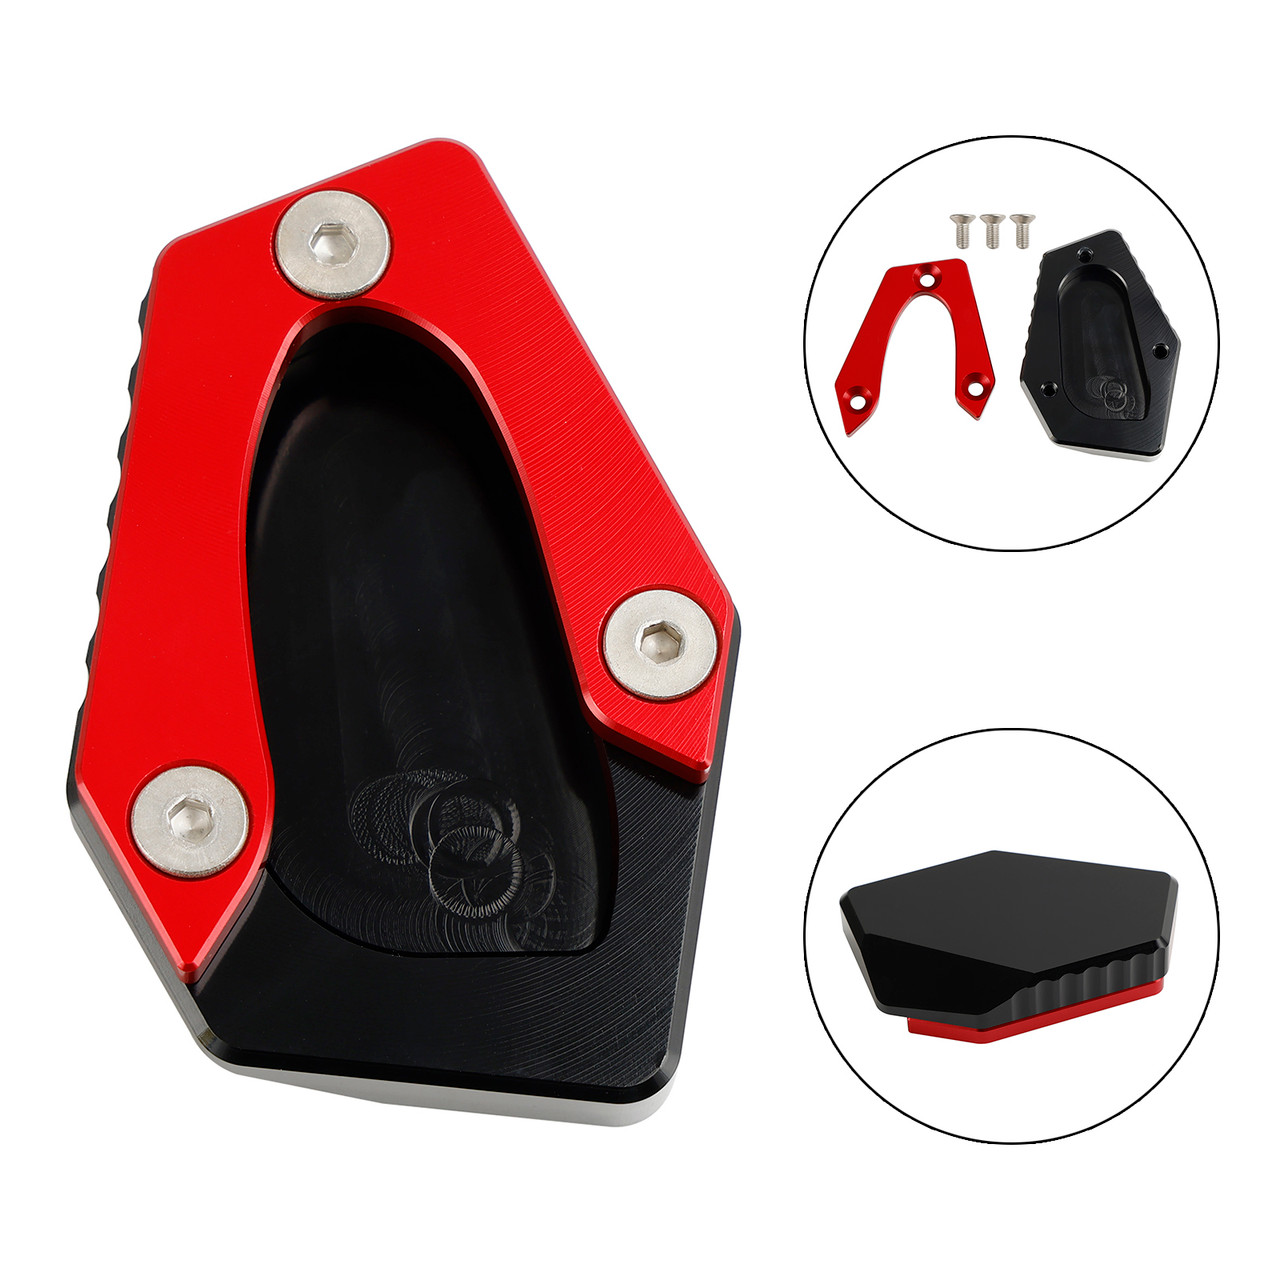 Kickstand Enlarge Plate Pad fit for Speed Twin 900 22-23 Street Cup 900 17-18 RED